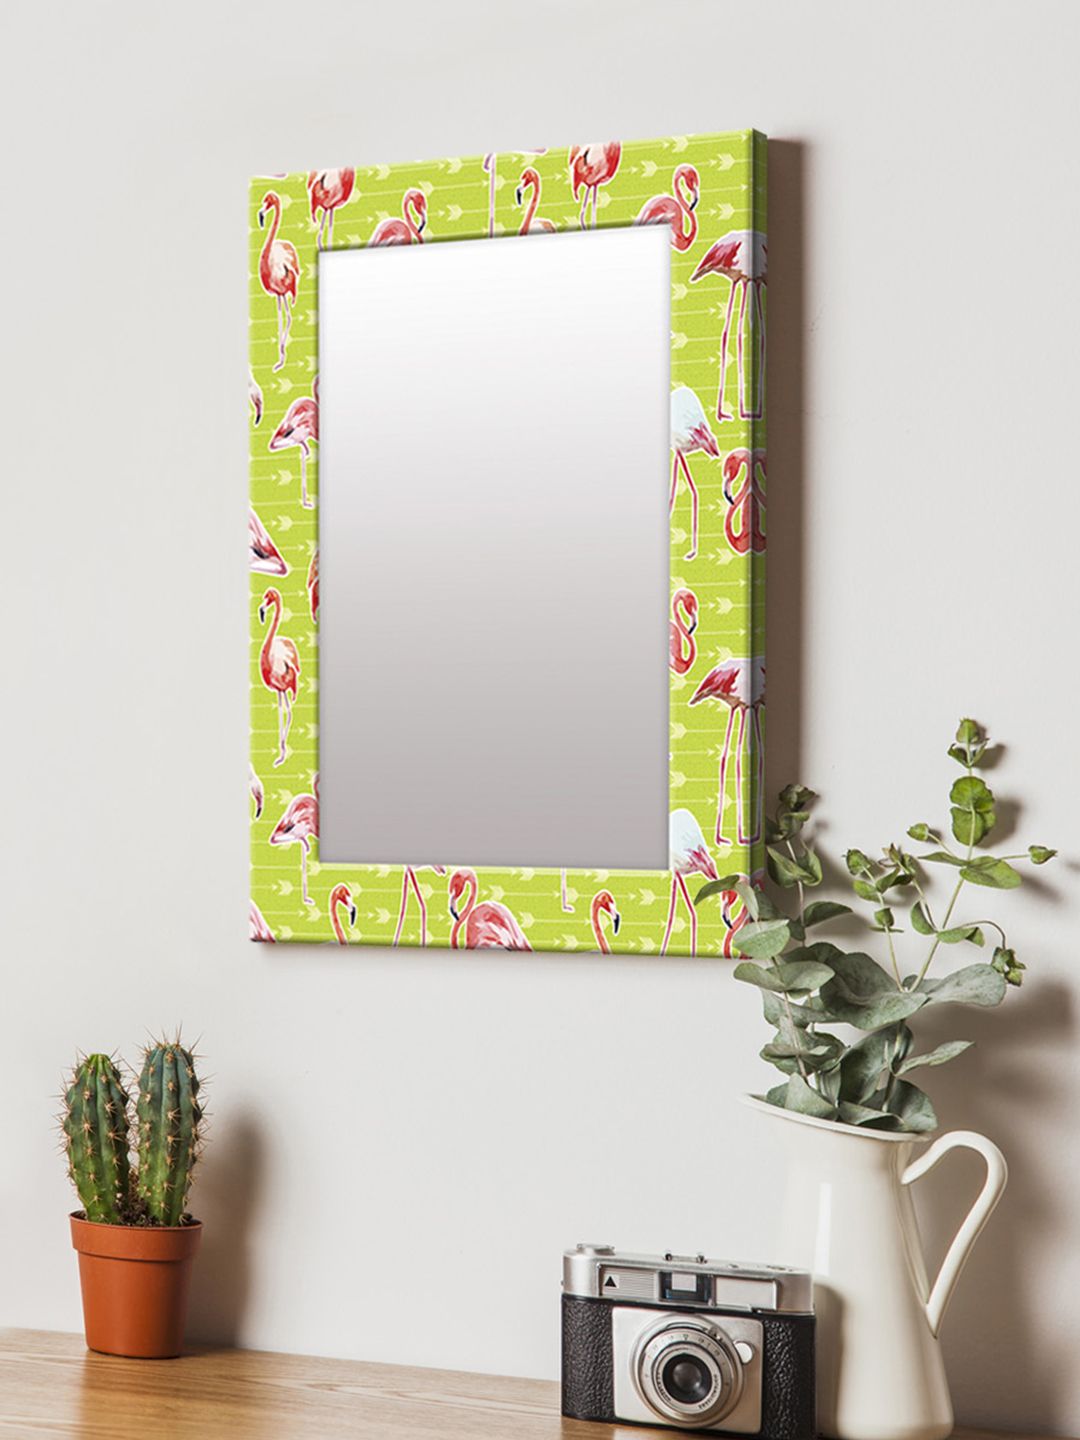 999Store Green & Red Printed MDF Wall Mirror Price in India